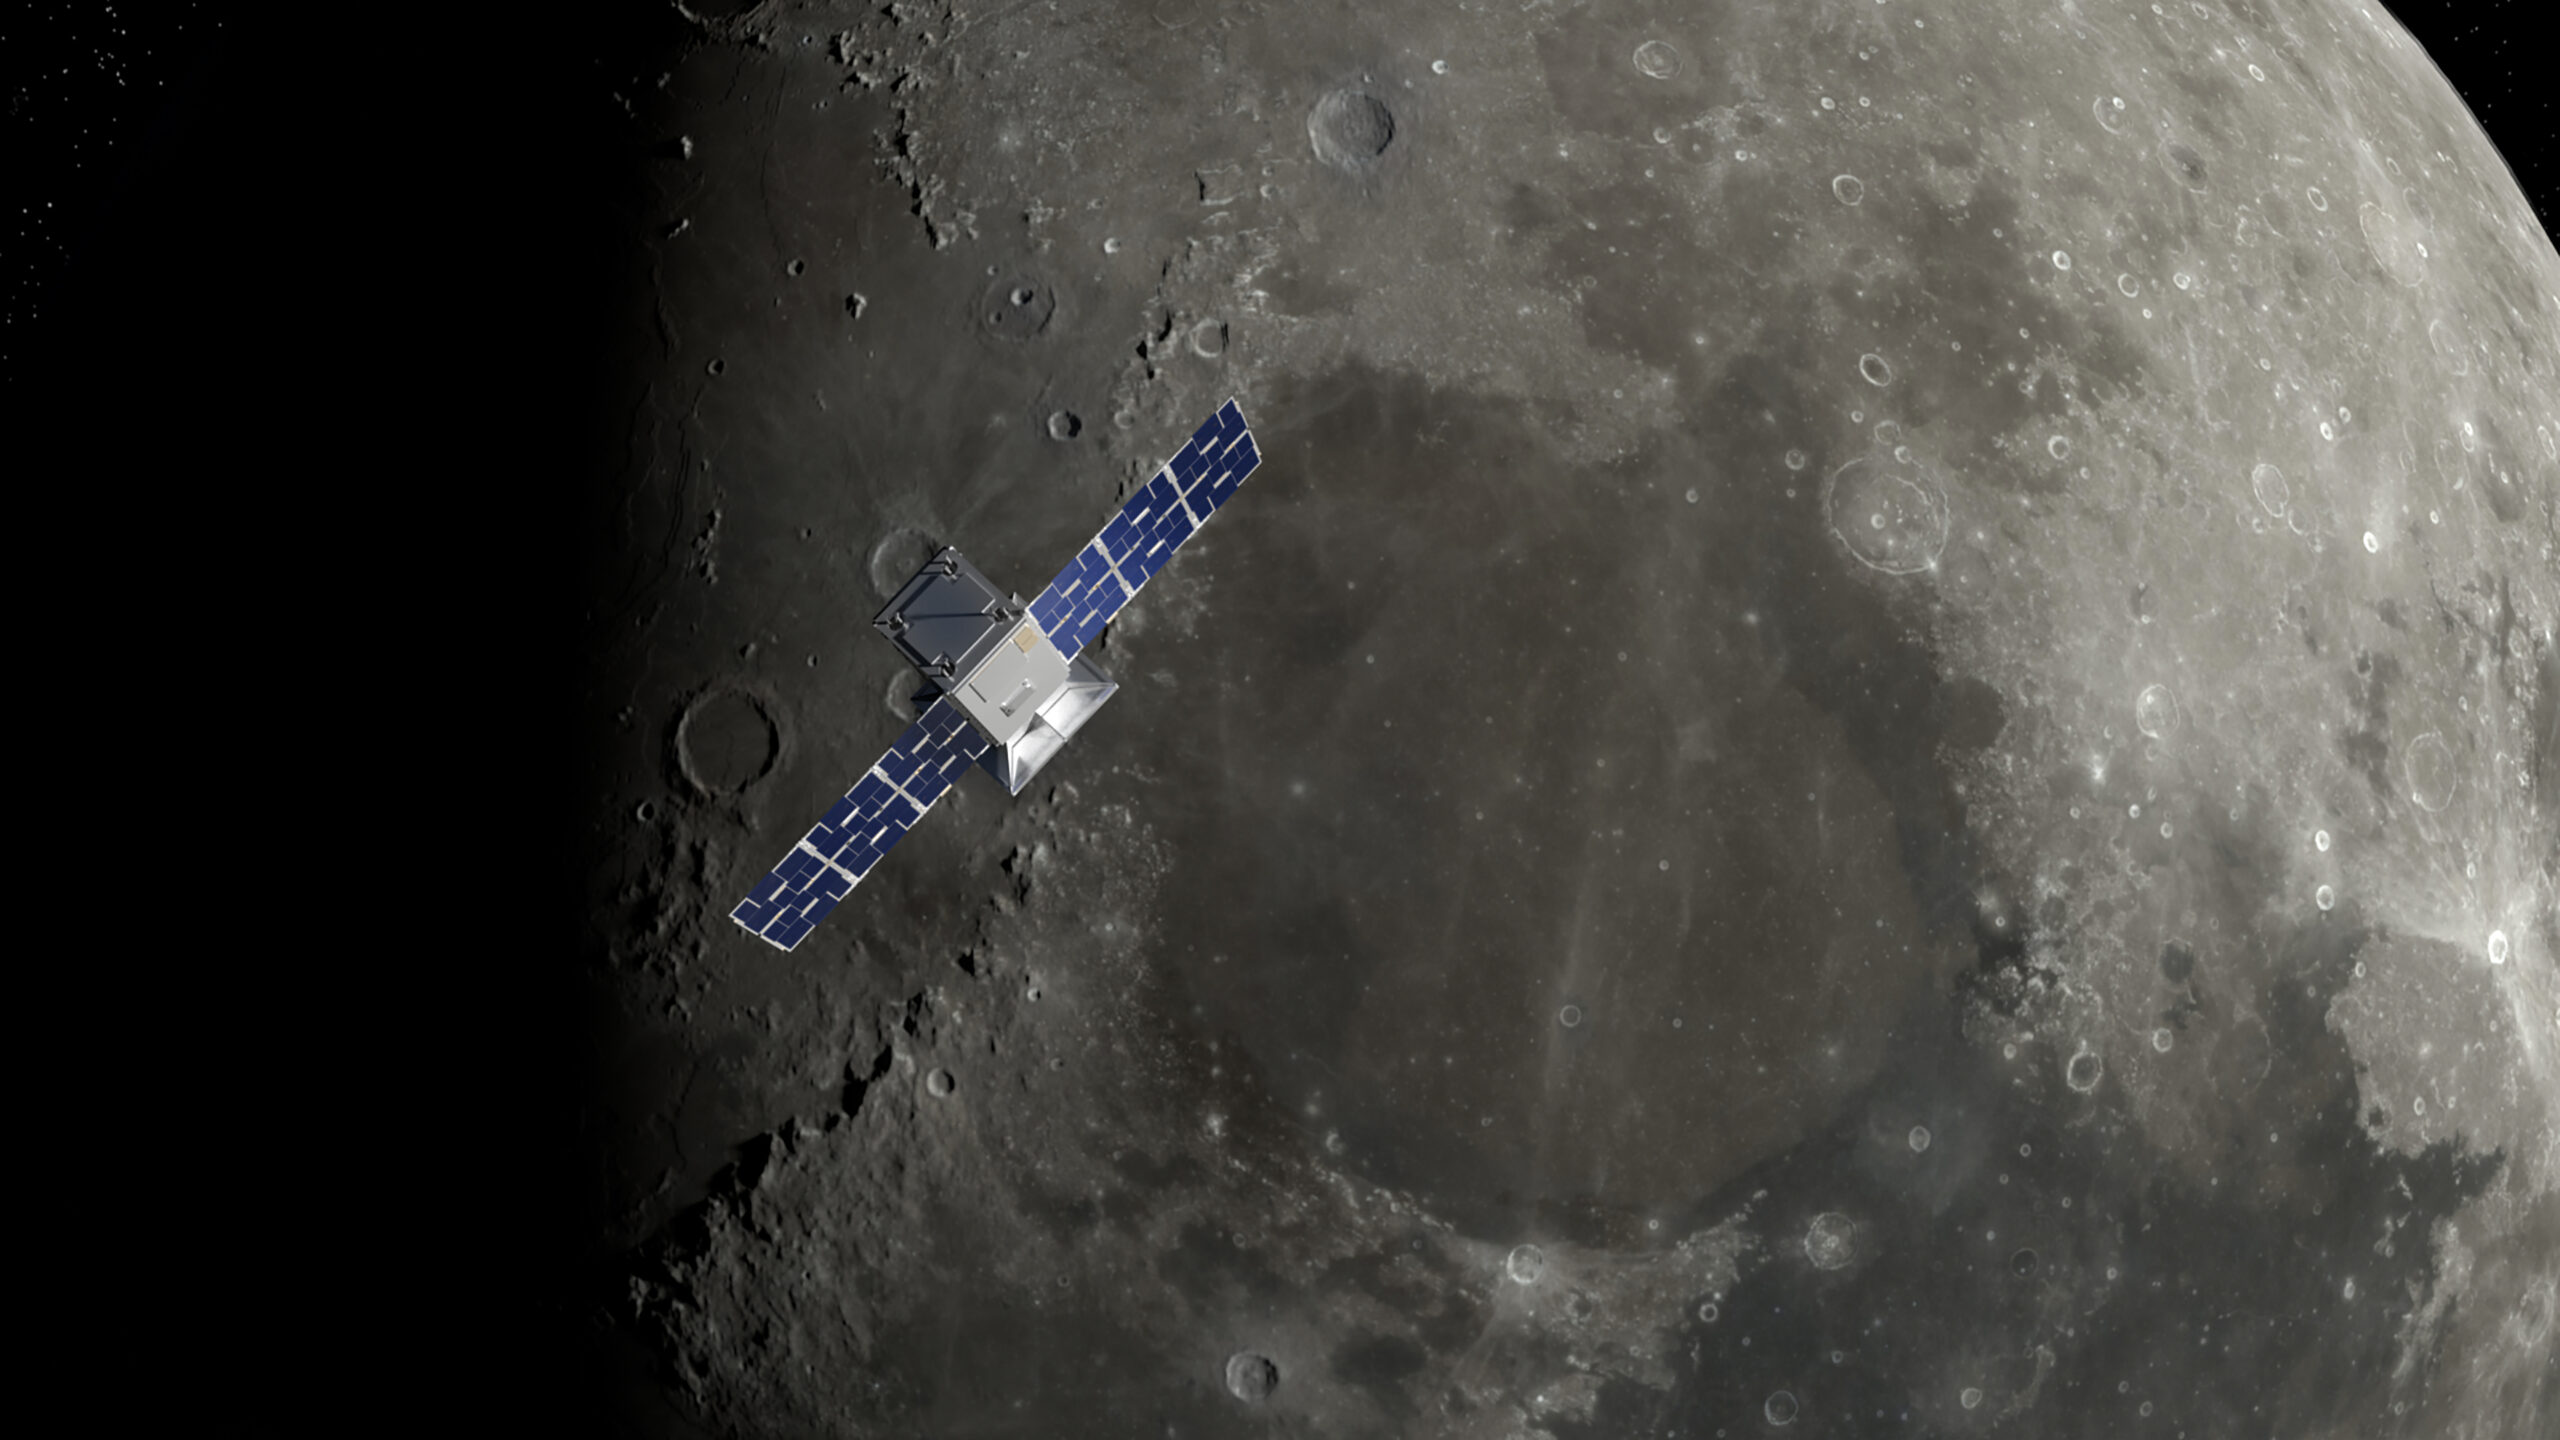 A satellite soaring above the moon